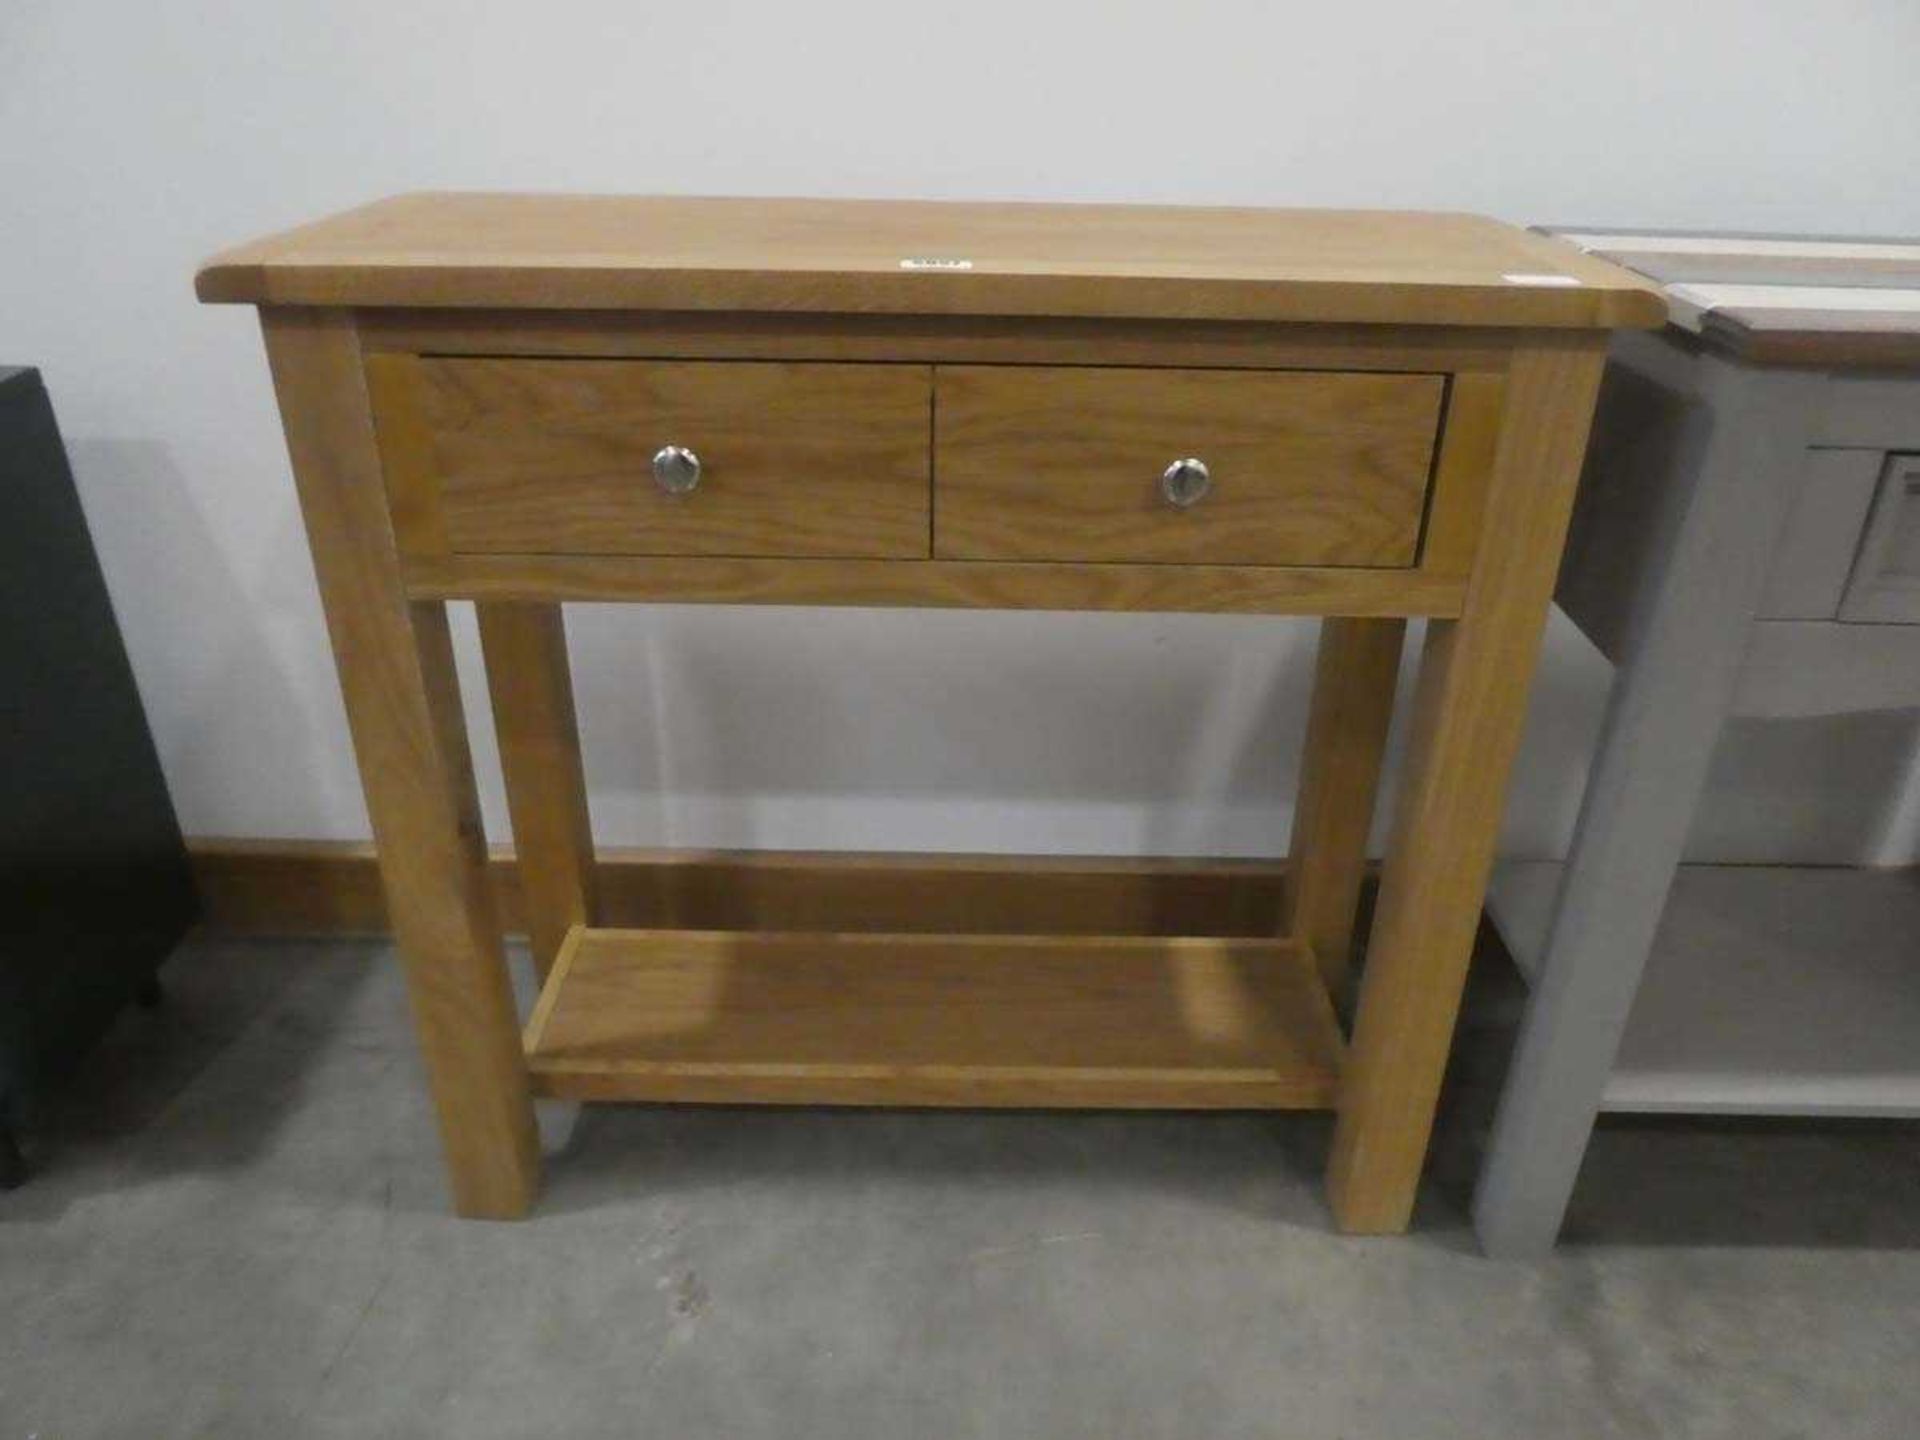 Pine 2 drawer side table with shelf under